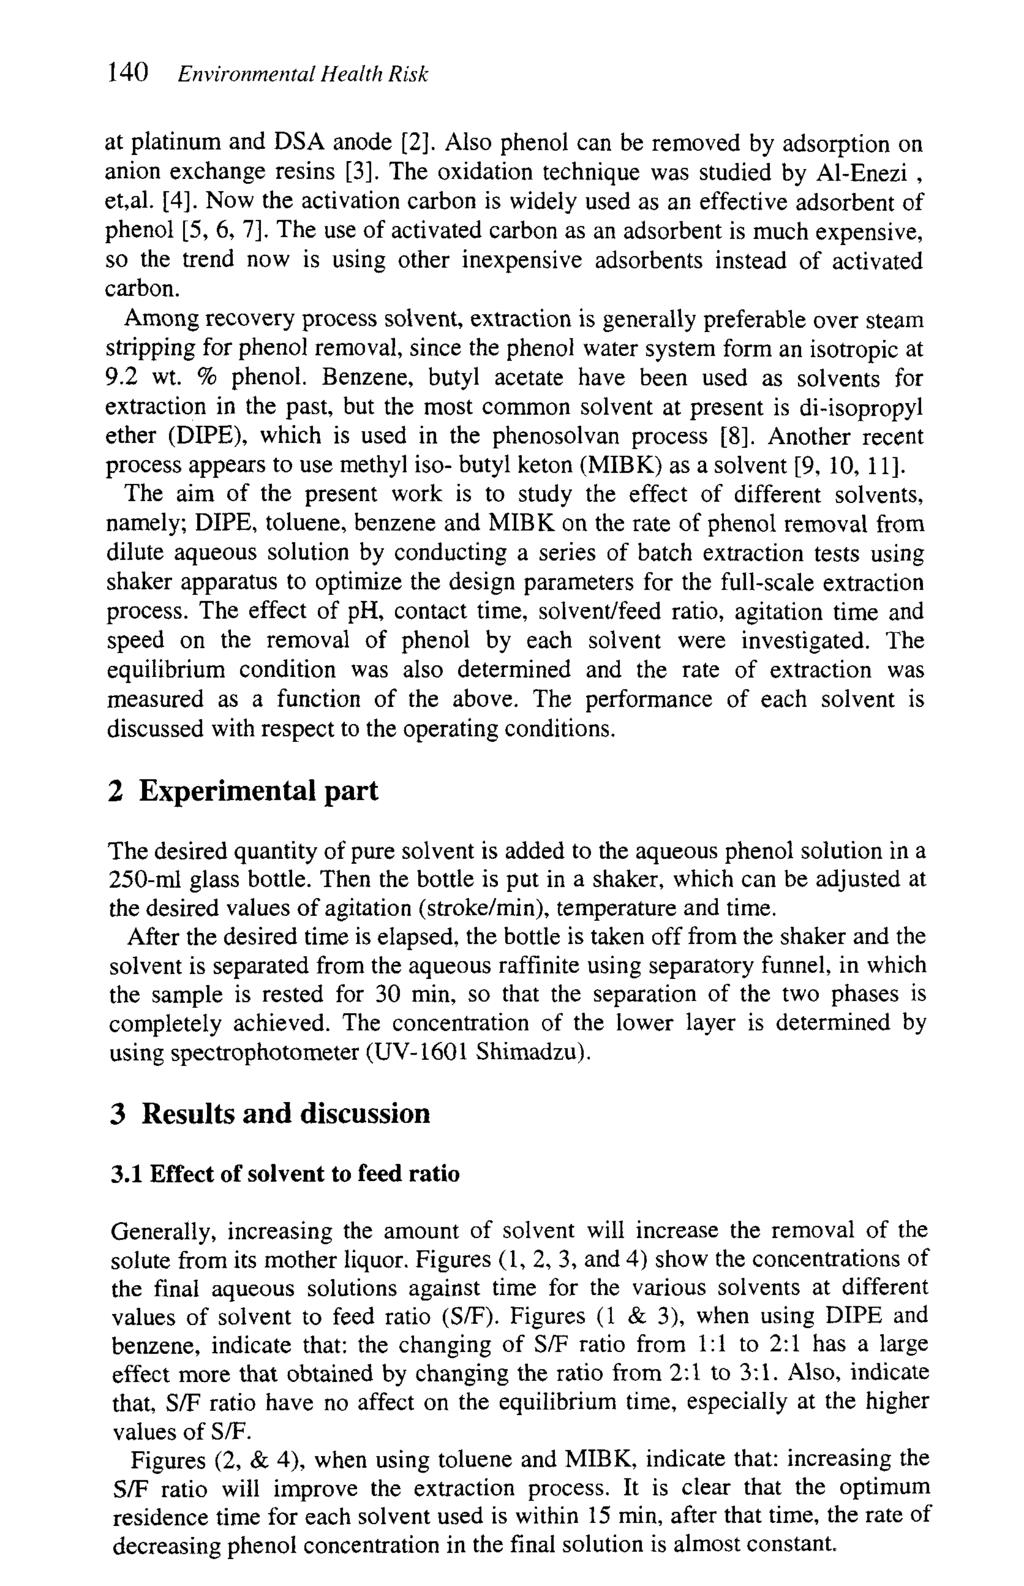 14 Environmental Health Risk at platinum and DSA anode [2]. Also phenol can be removed by adsorption on anion exchange resins [31. The oxidation technique was studied by Al-Enezi, et,al. [4].